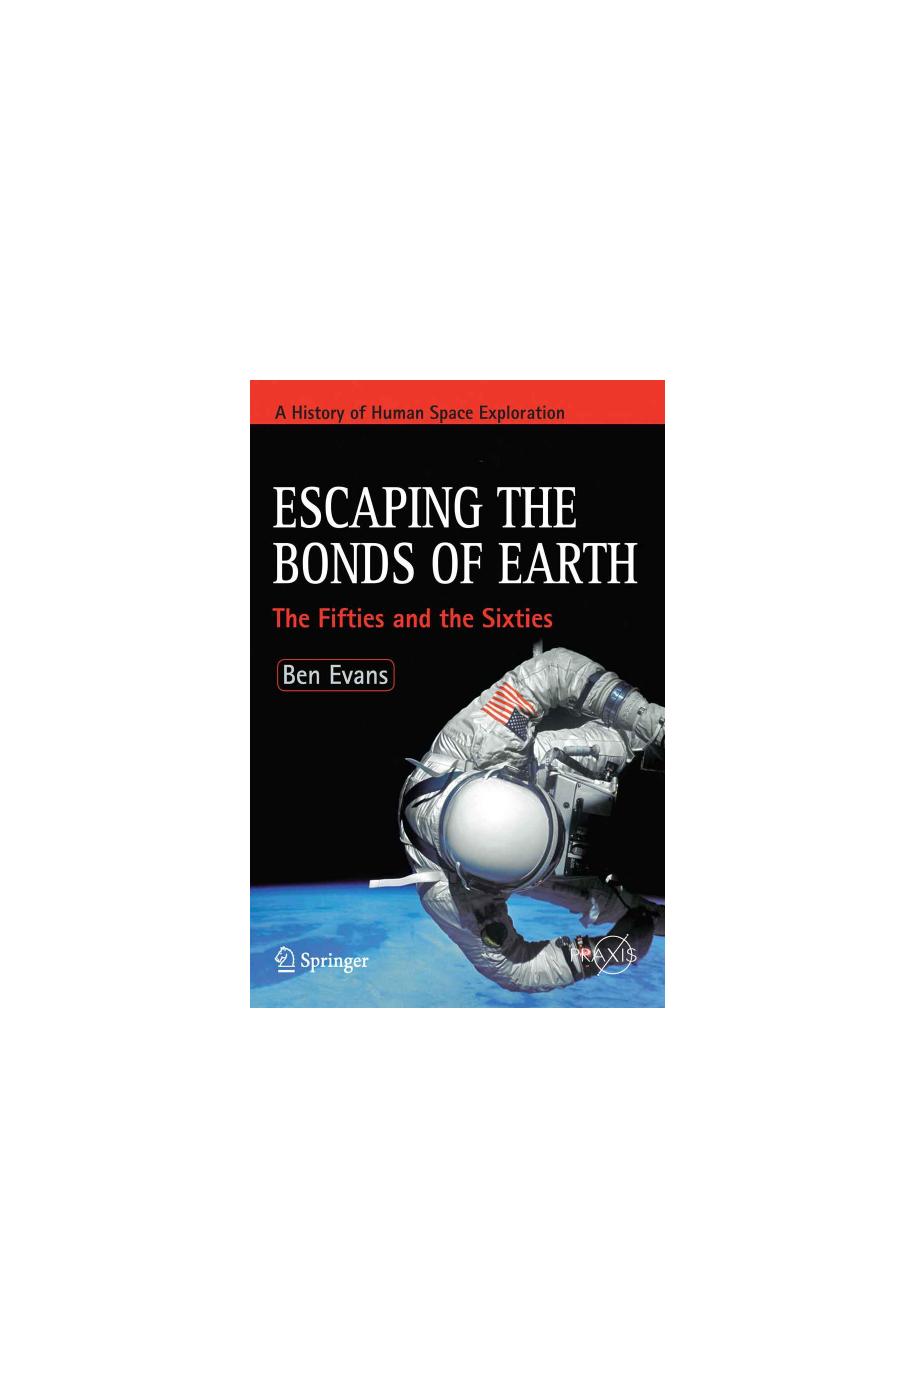 Escaping the Bonds of Earth: The Fifties and the Sixties by Ben Evans